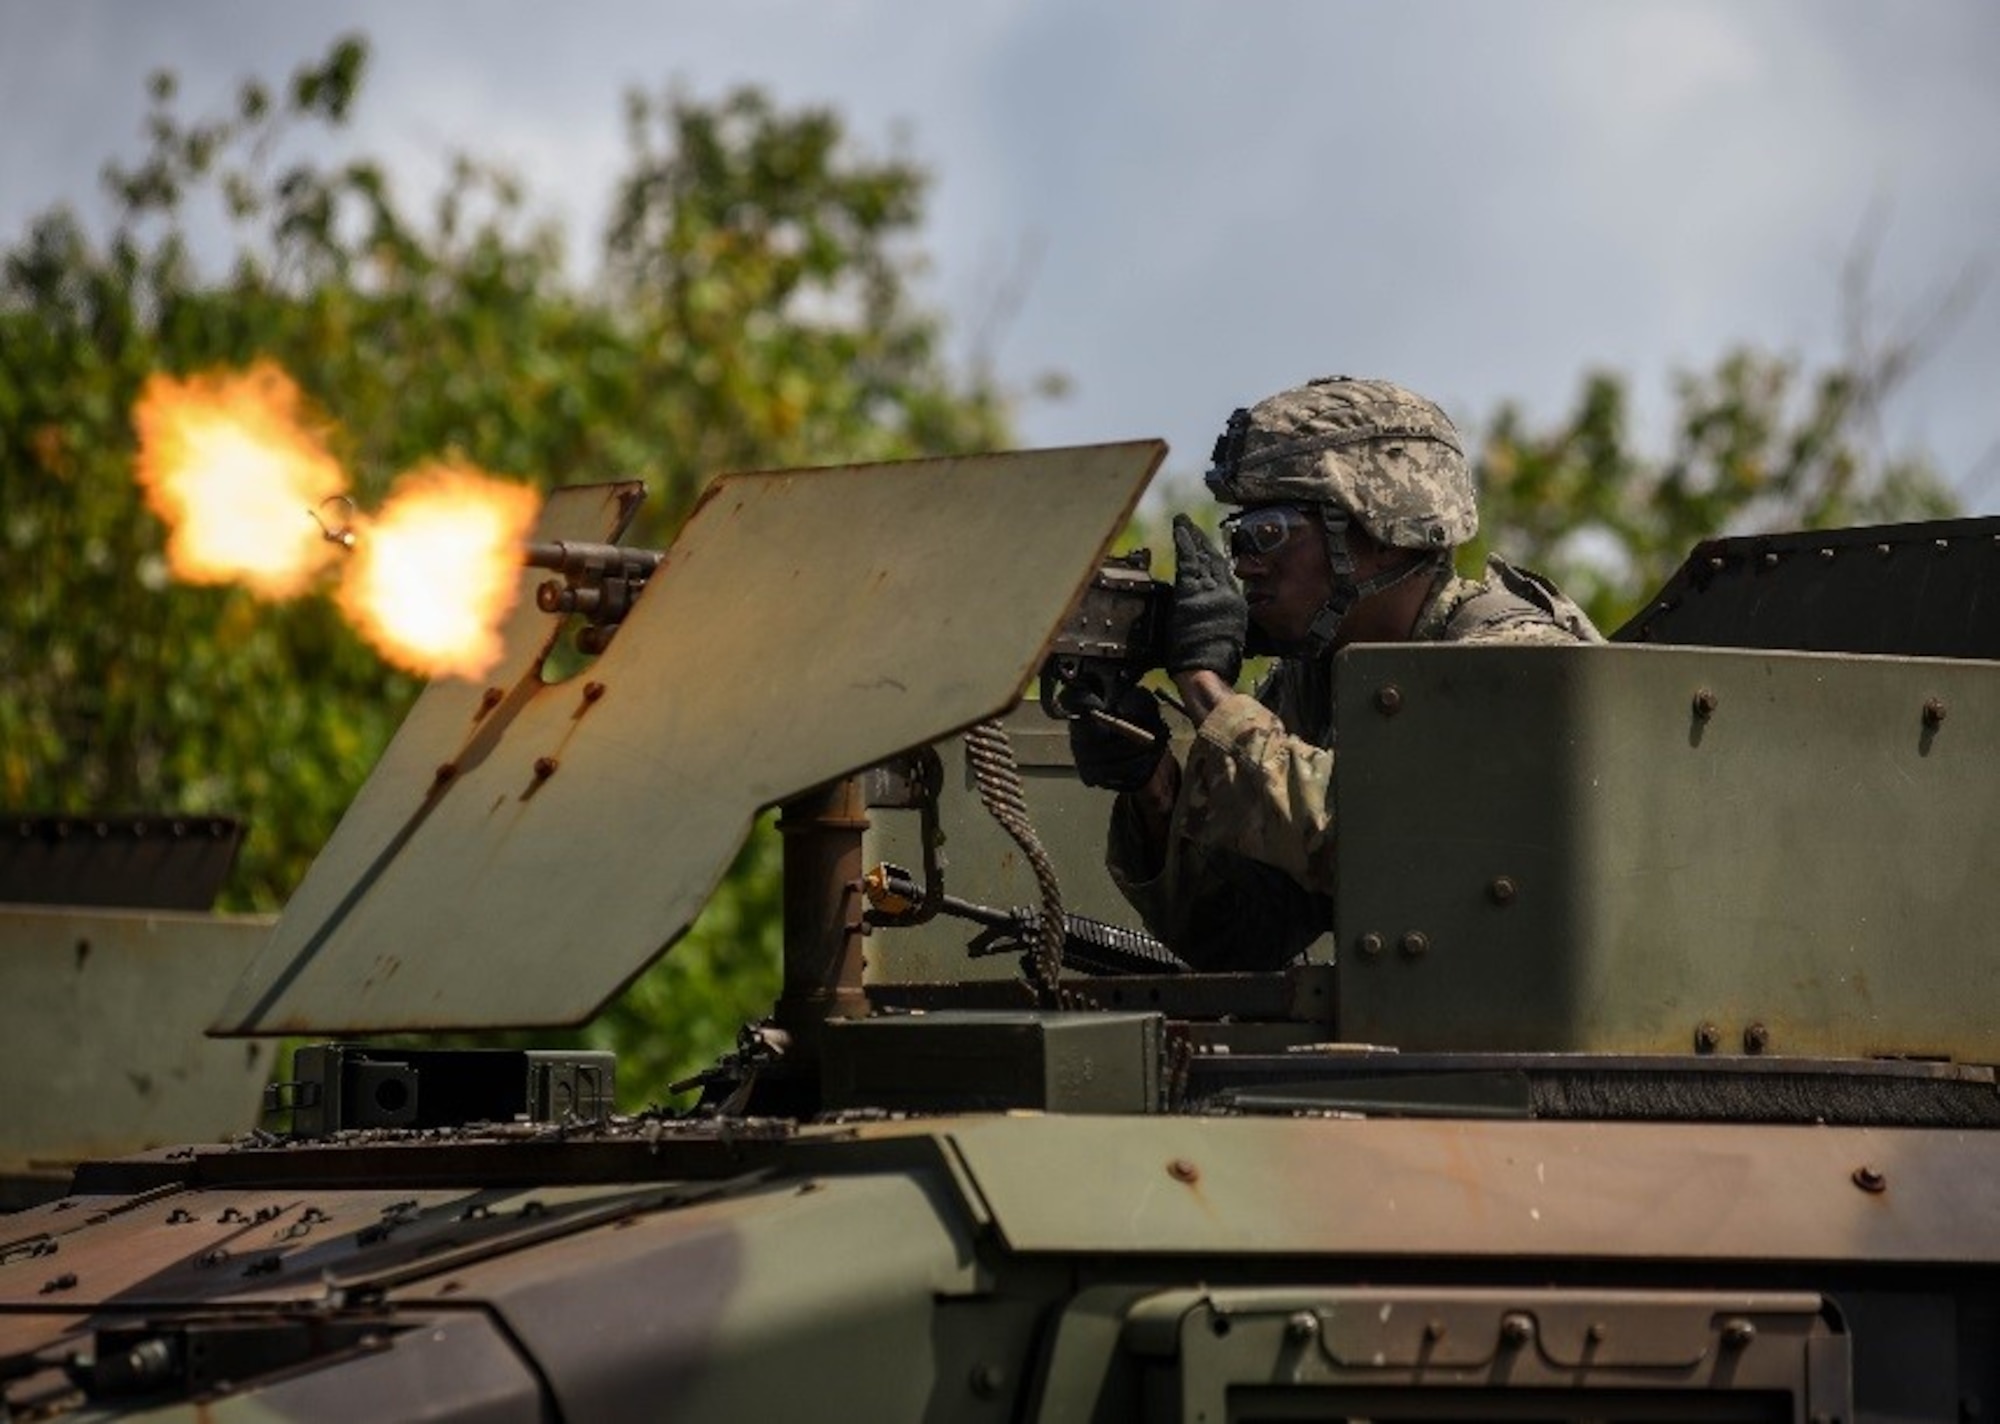 A U.S. Soldier from Task Force Talon, 94th Army Air and Missile Defense Command, fires blank rounds at opposing forces during a combat search and rescue training exercise June 5, 2017, at Andersen South, Guam. Service members from TFT, Helicopter Sea Combat Squadron Two-Five, and the 36th Wing joined together to practice survival, evasion, resistance and escape procedures, emergency evacuation techniques and quick reaction force training. This is the first time these units participated in a combat search and rescue exercise together on Guam. (U.S. Air Force photo by Staff Sgt. Joshua Smoot)
